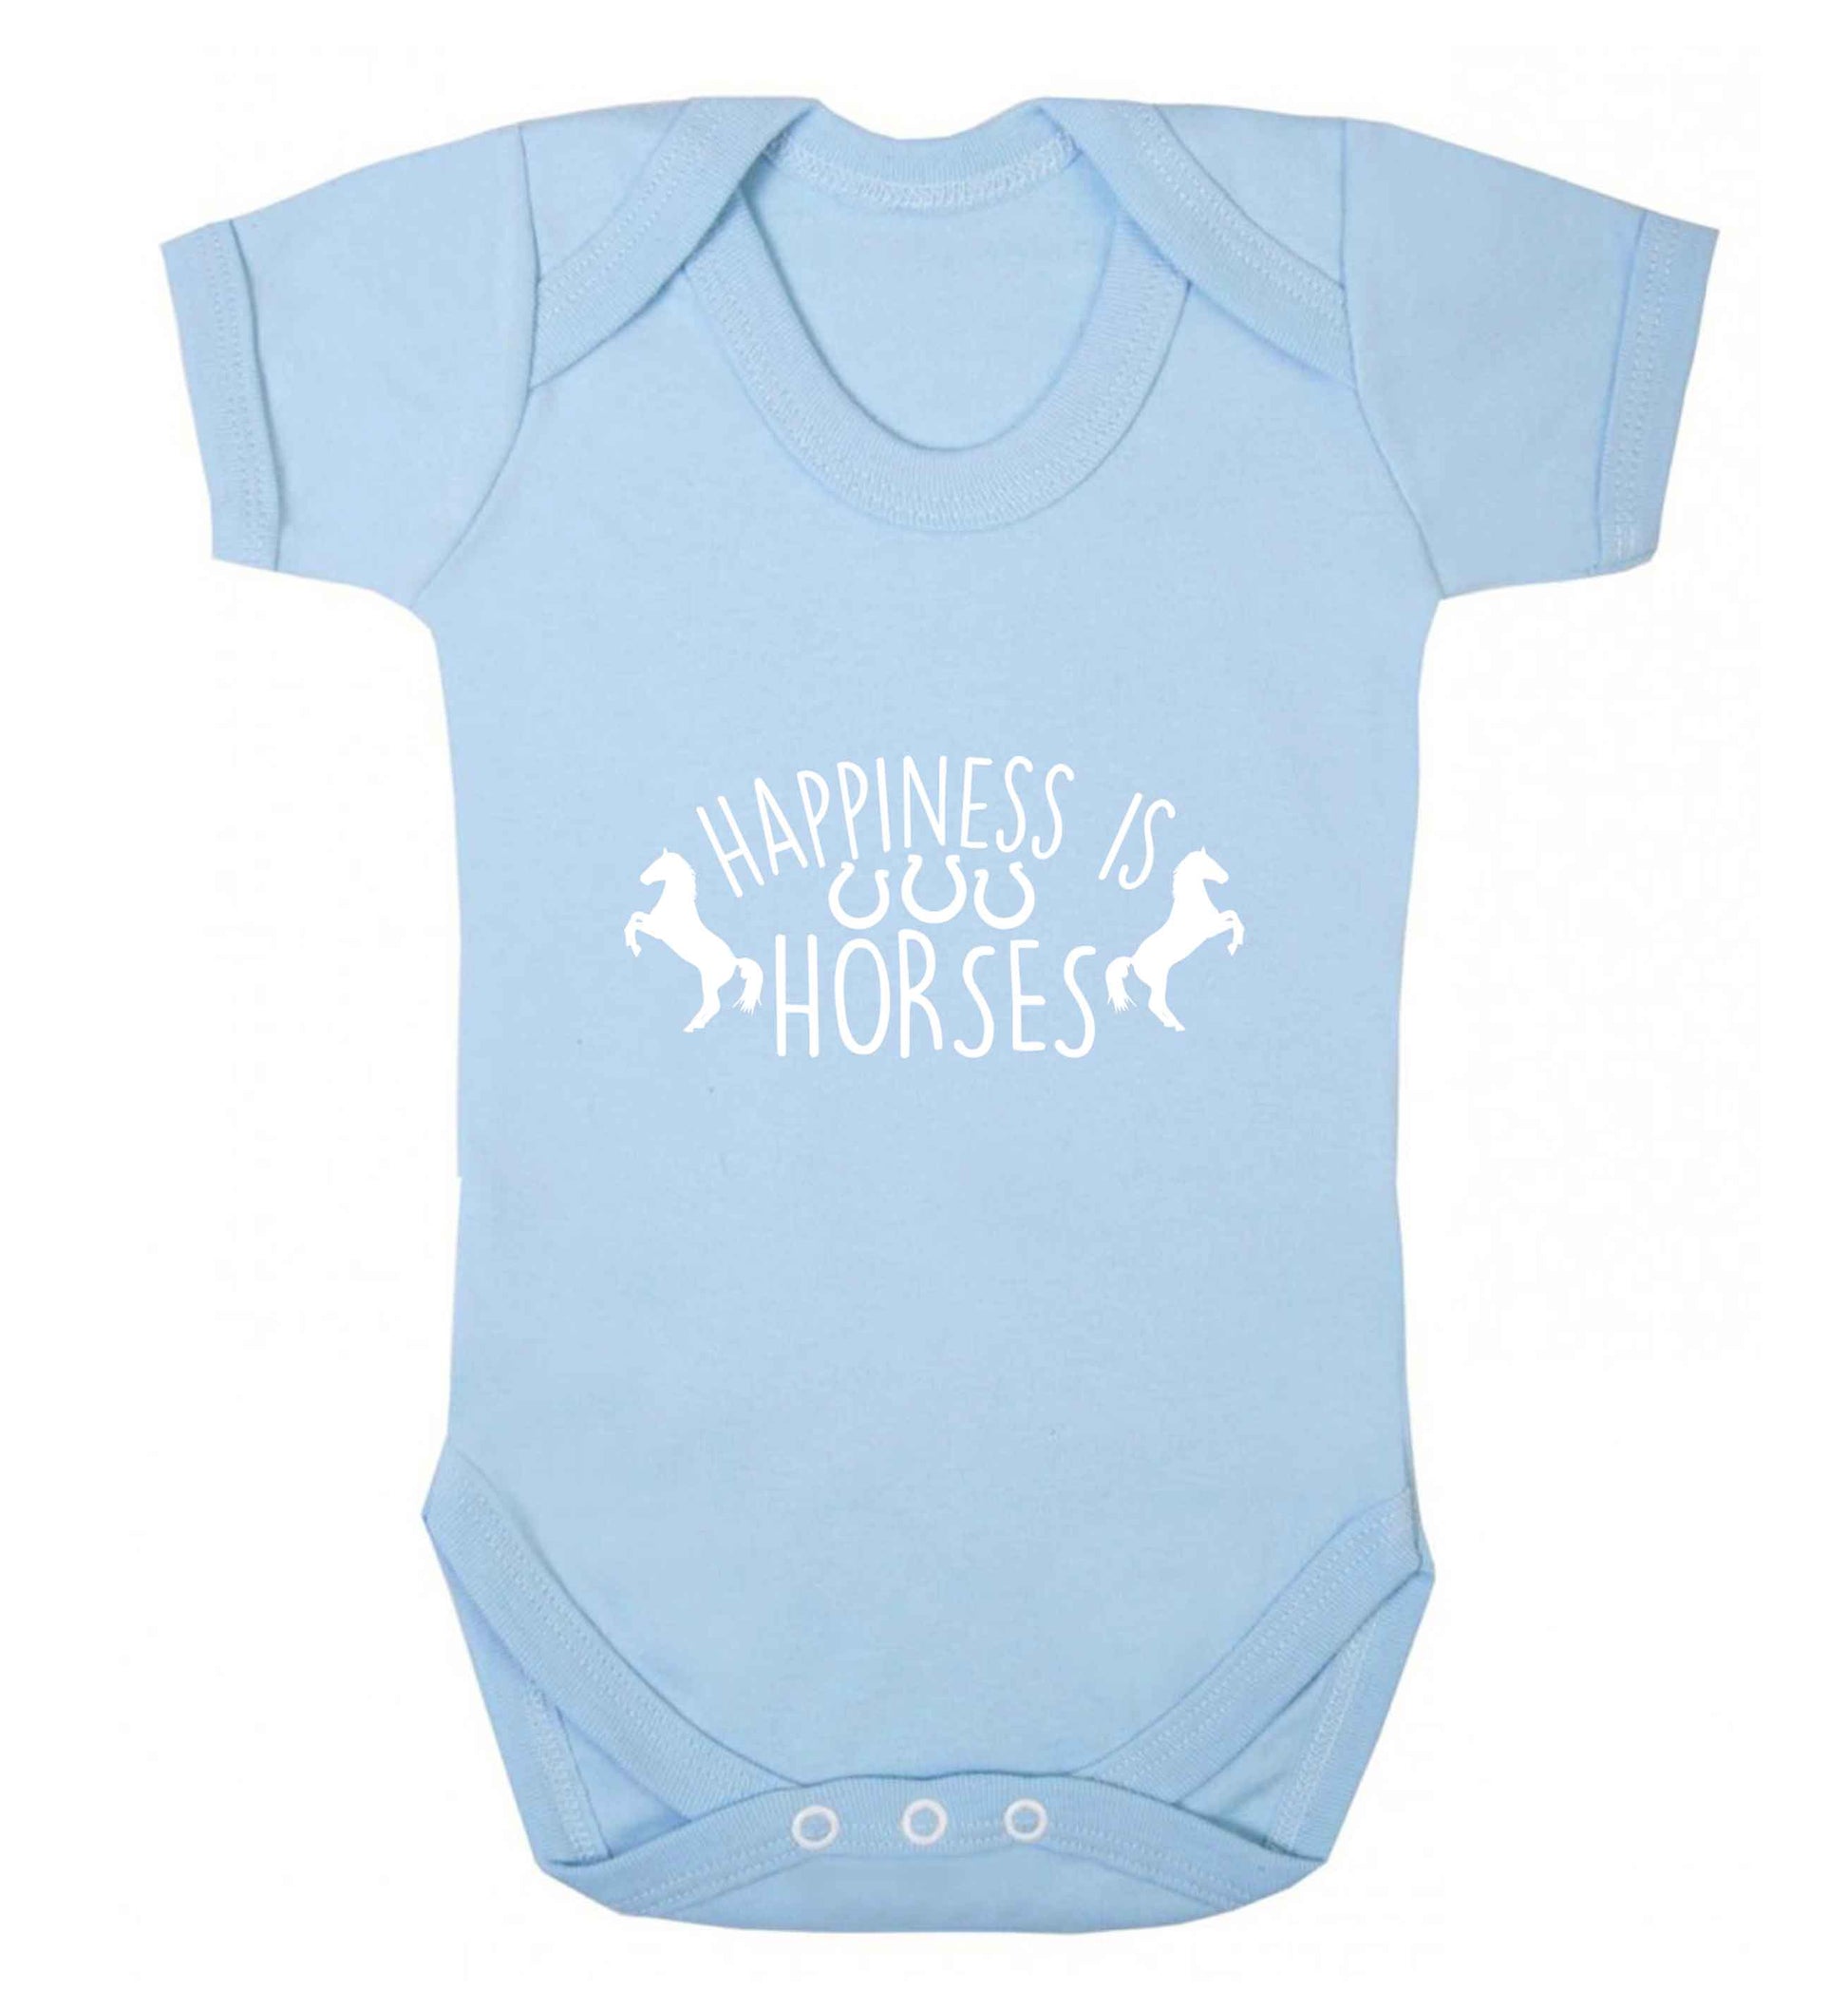 Happiness is horses baby vest pale blue 18-24 months